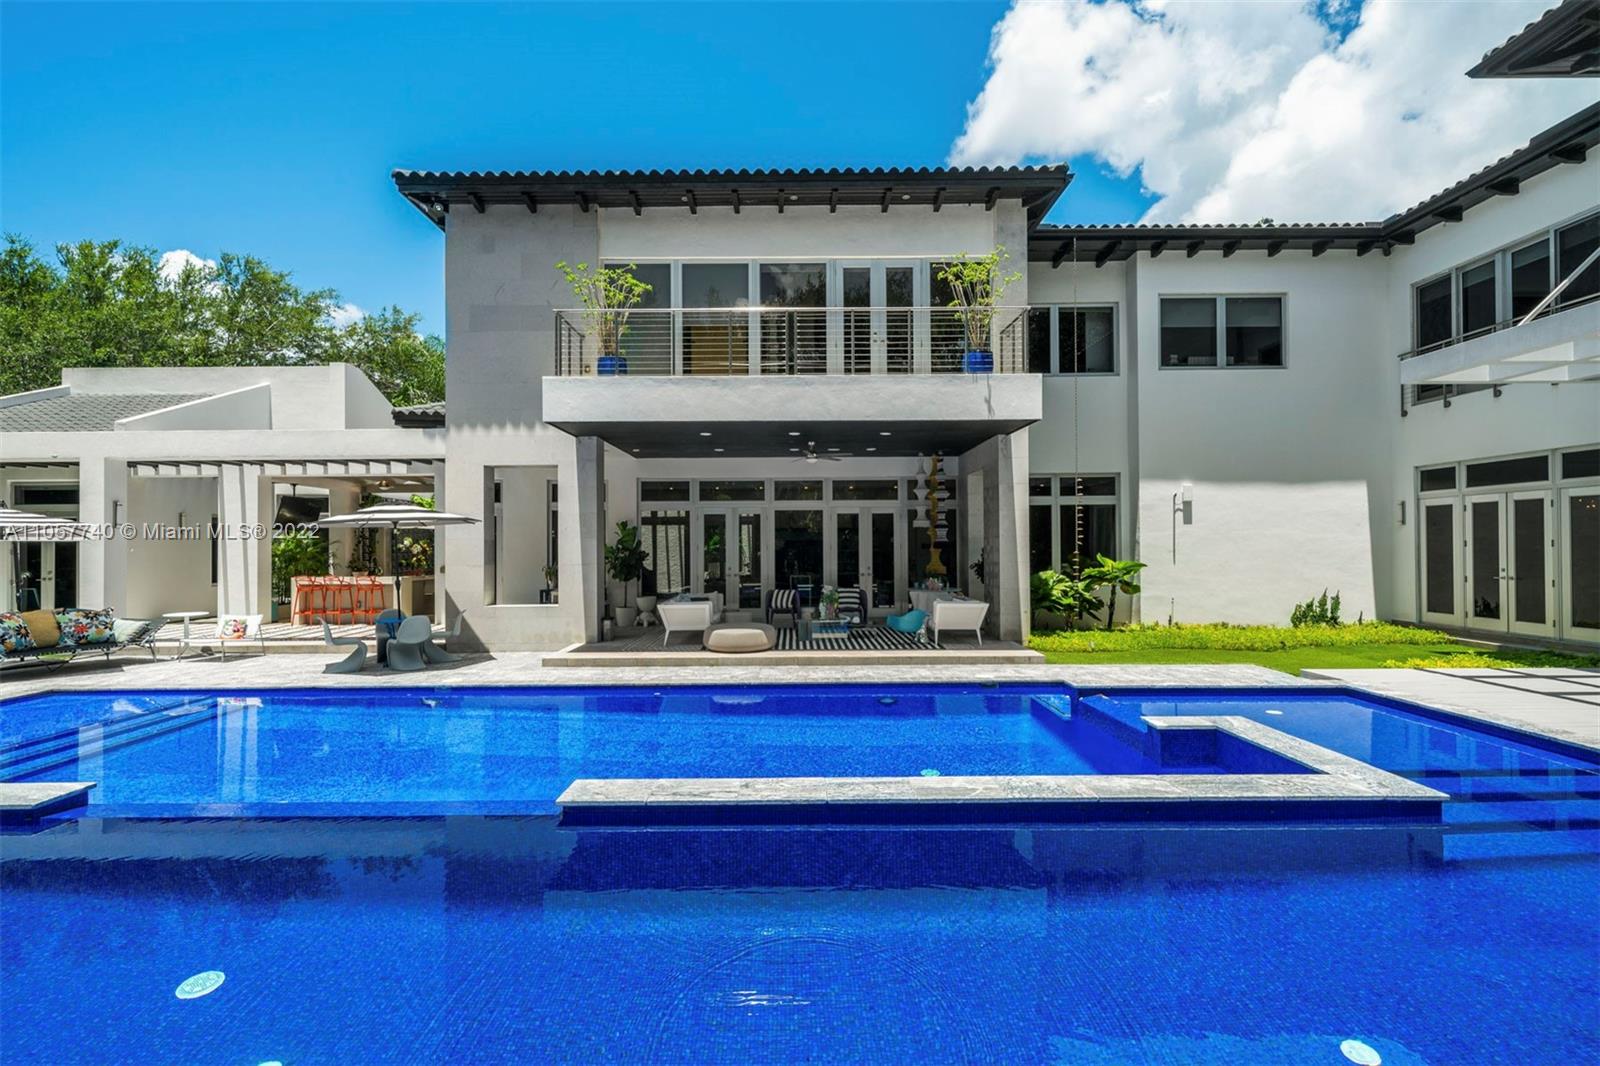 Glamorous contemporary living in Ponce Davis. This 10,267 Sq. Ft. home, with 7 bedrooms, 7 full and 2 half bathrooms, features open balconies throughout the second floor, high ceilings, tall windows, and French doors allowing seamless integration of the indoor living spaces and outdoor terraces. State-of-the-art floor plan includes an open family room and beautifully appointed chef’s kitchen with Miele and Gaggenau appliances. The main suite, with seating and an office area overlooking the gardens, has a sumptuous spa-like bathroom. Superbly designed and manicured grounds include a sparkling pool with wave pump, covered terraces ideal for entertaining, full summer kitchen, and separate fitness room. This magnificent home balances style and comfort, perfect for today’s lifestyle.